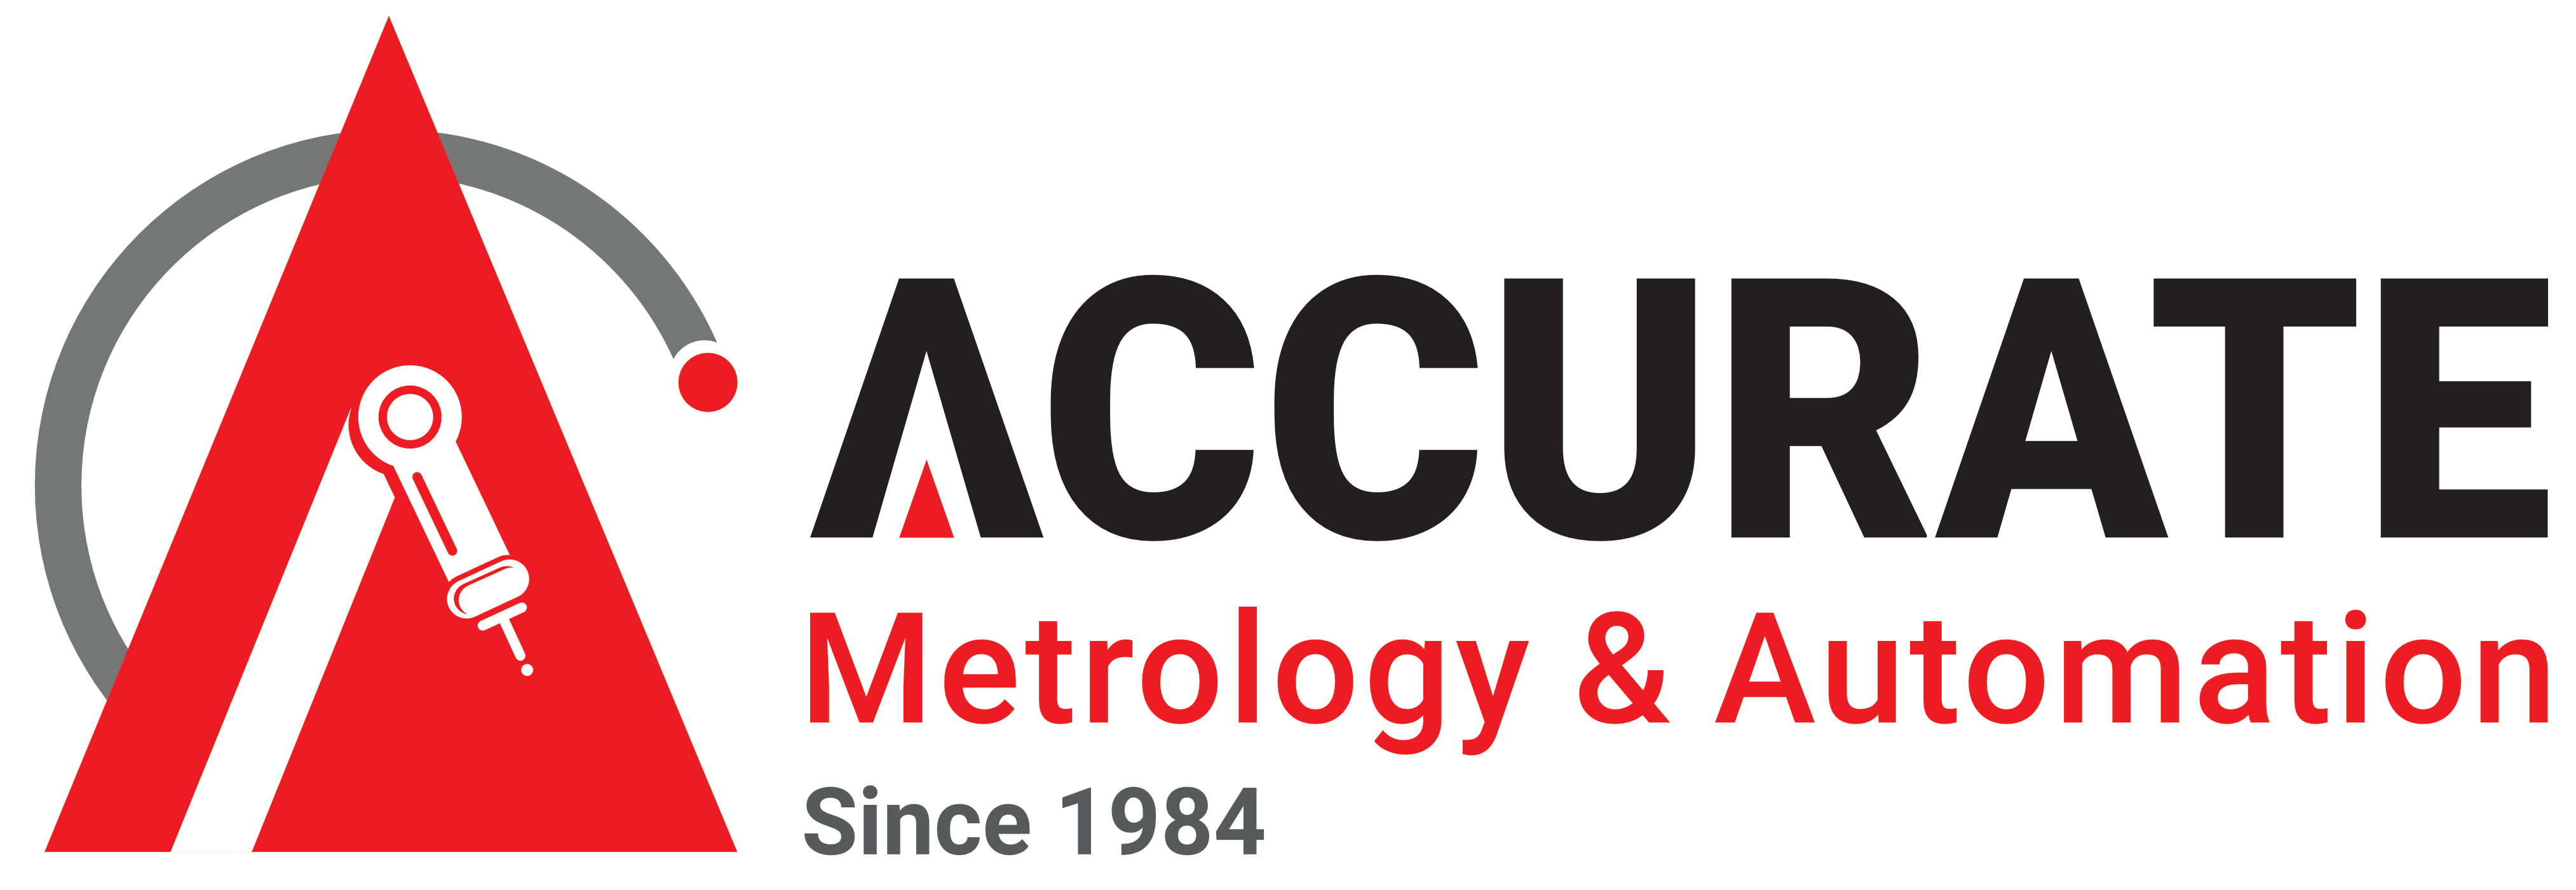 Accurate Metrology And Automation Company